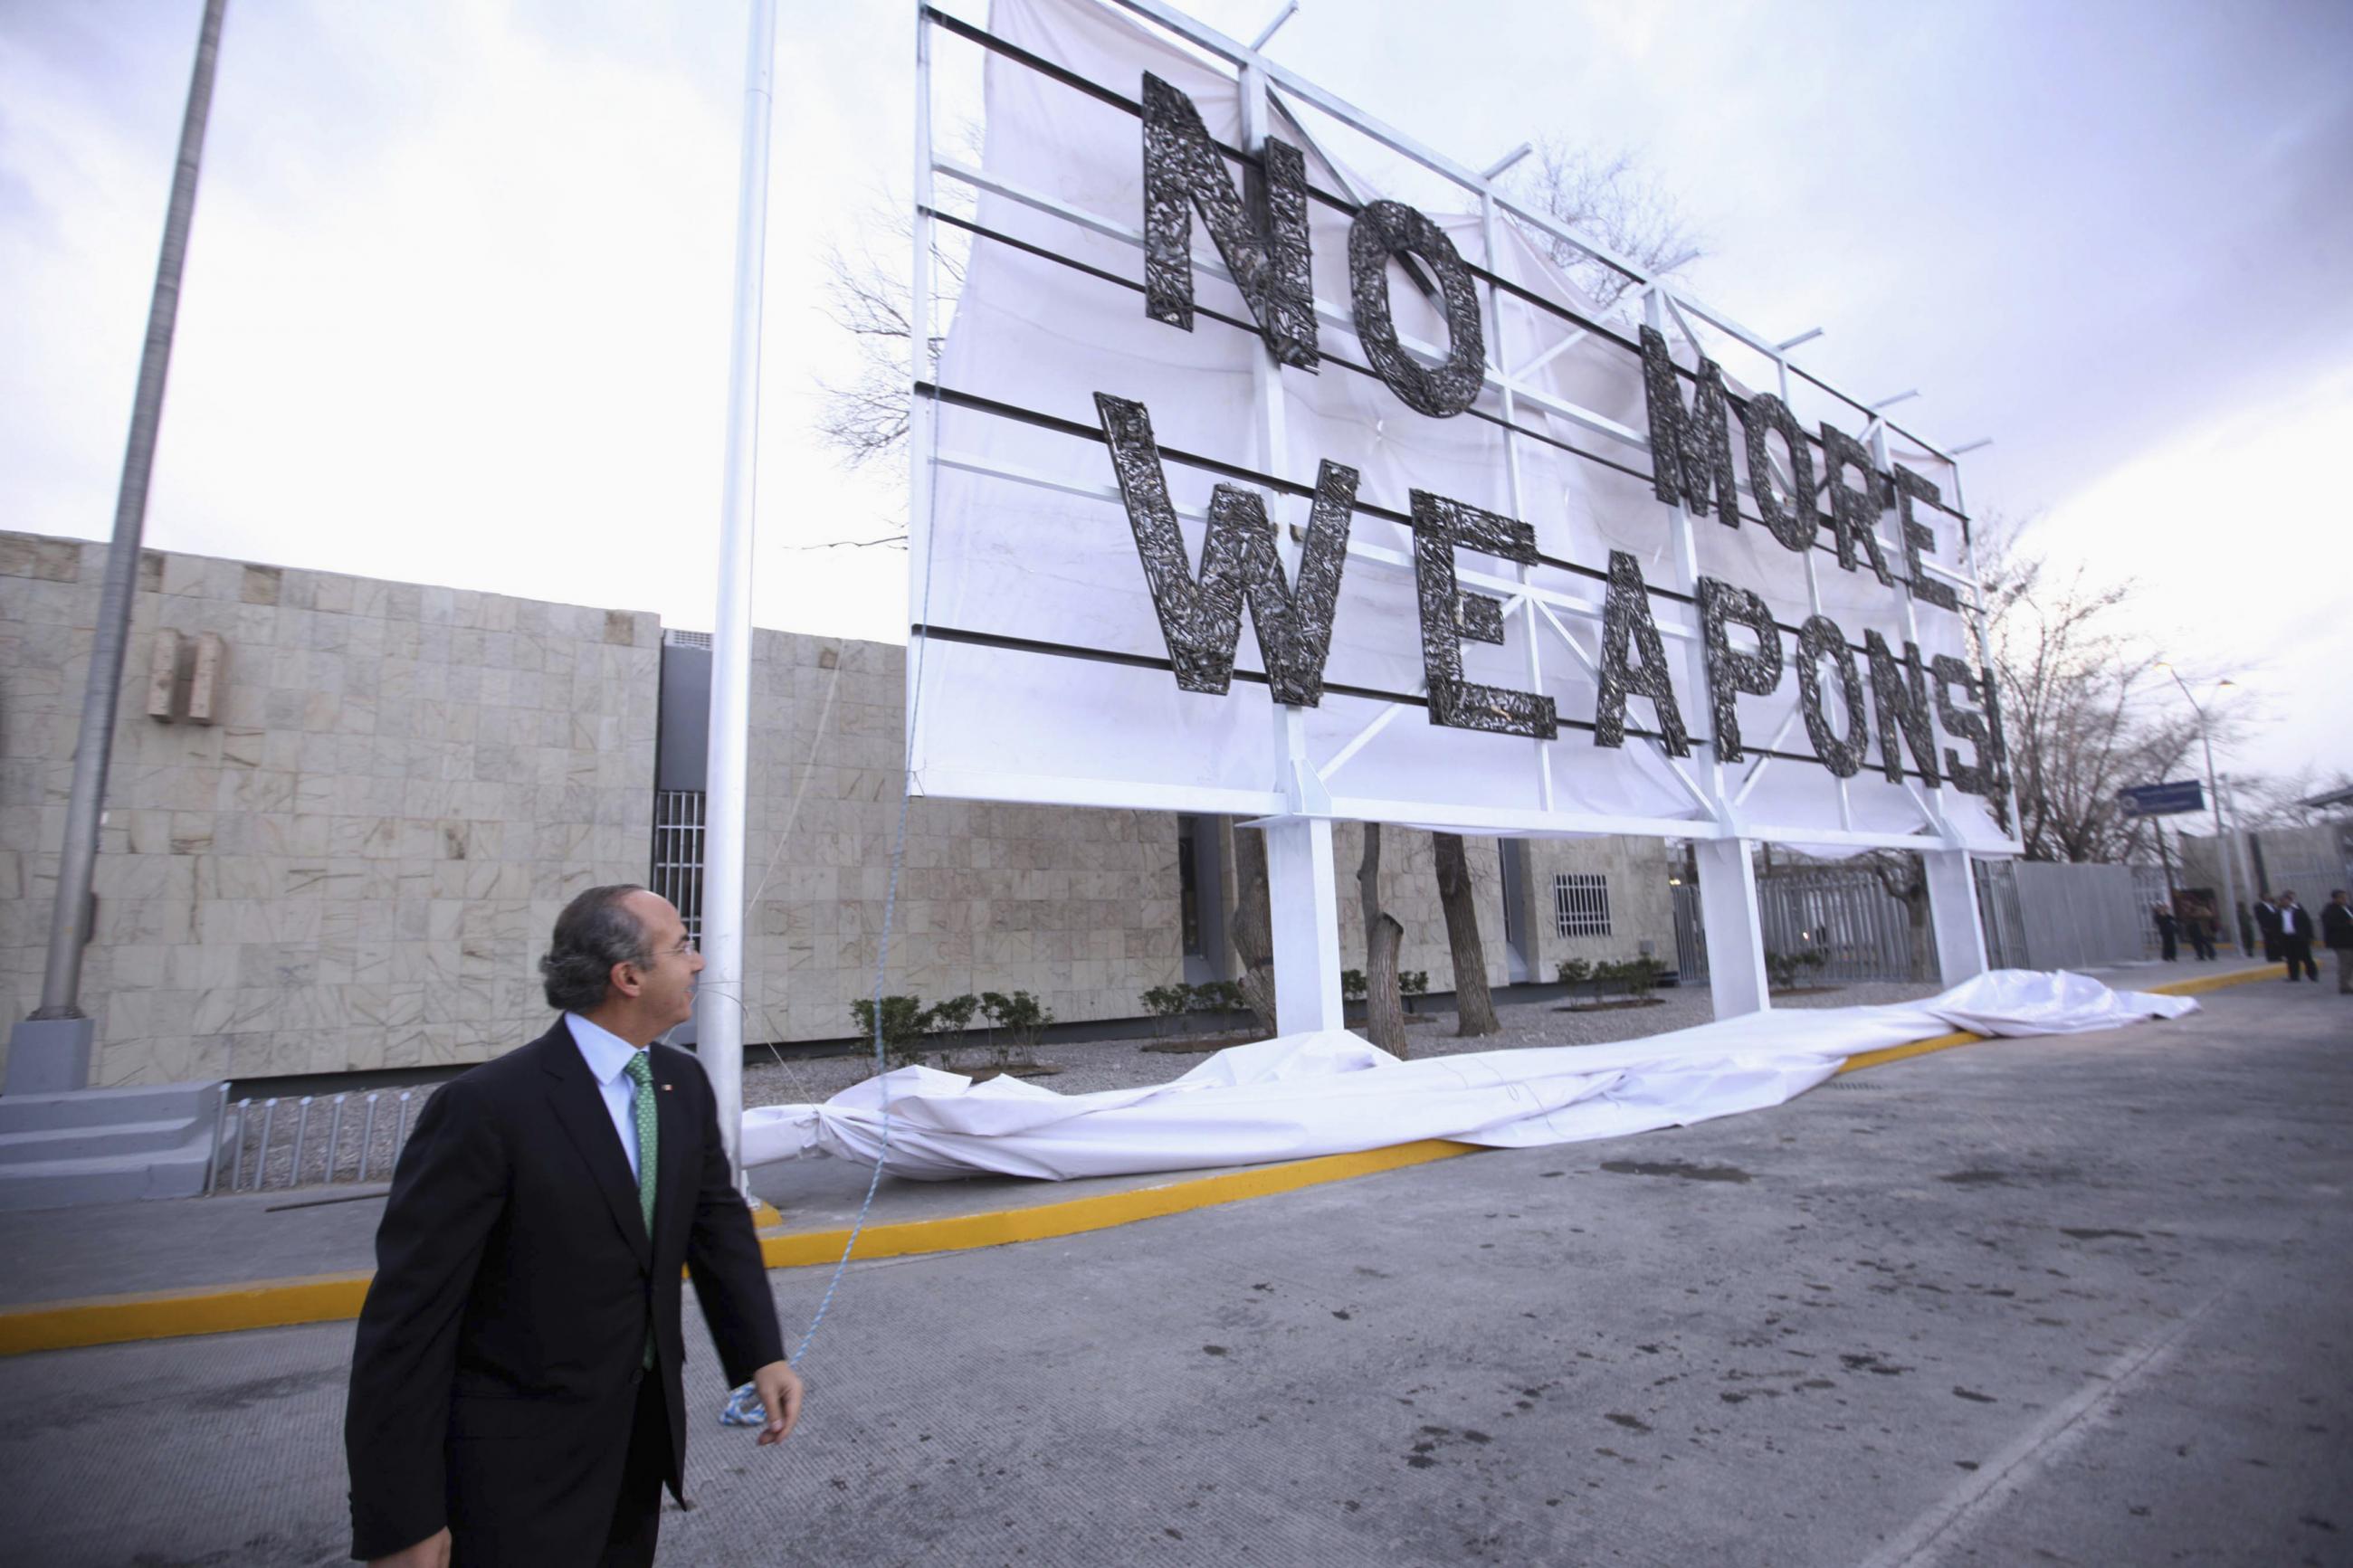 Mexican President Felipe Calderon wears a black suit as he glances behind after unveiling a white banner with big black letters reading "No More Weapons" during an event next to the Cordova-Americas international border crossing bridge in the border city of Ciudad Juarez on February 16, 2012. 